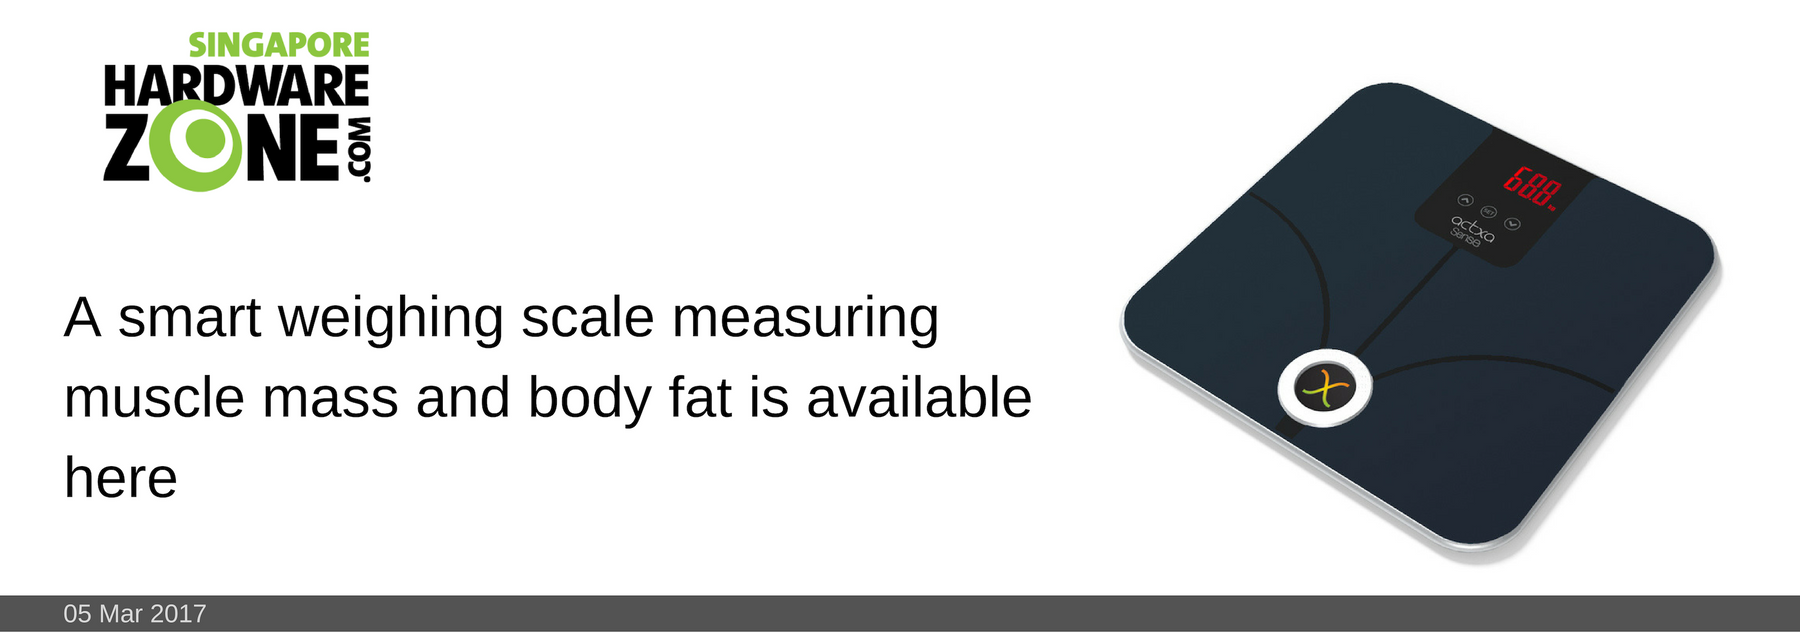 22 FEB 2017: A smart weighing scale measuring muscle mass and body fat is available here